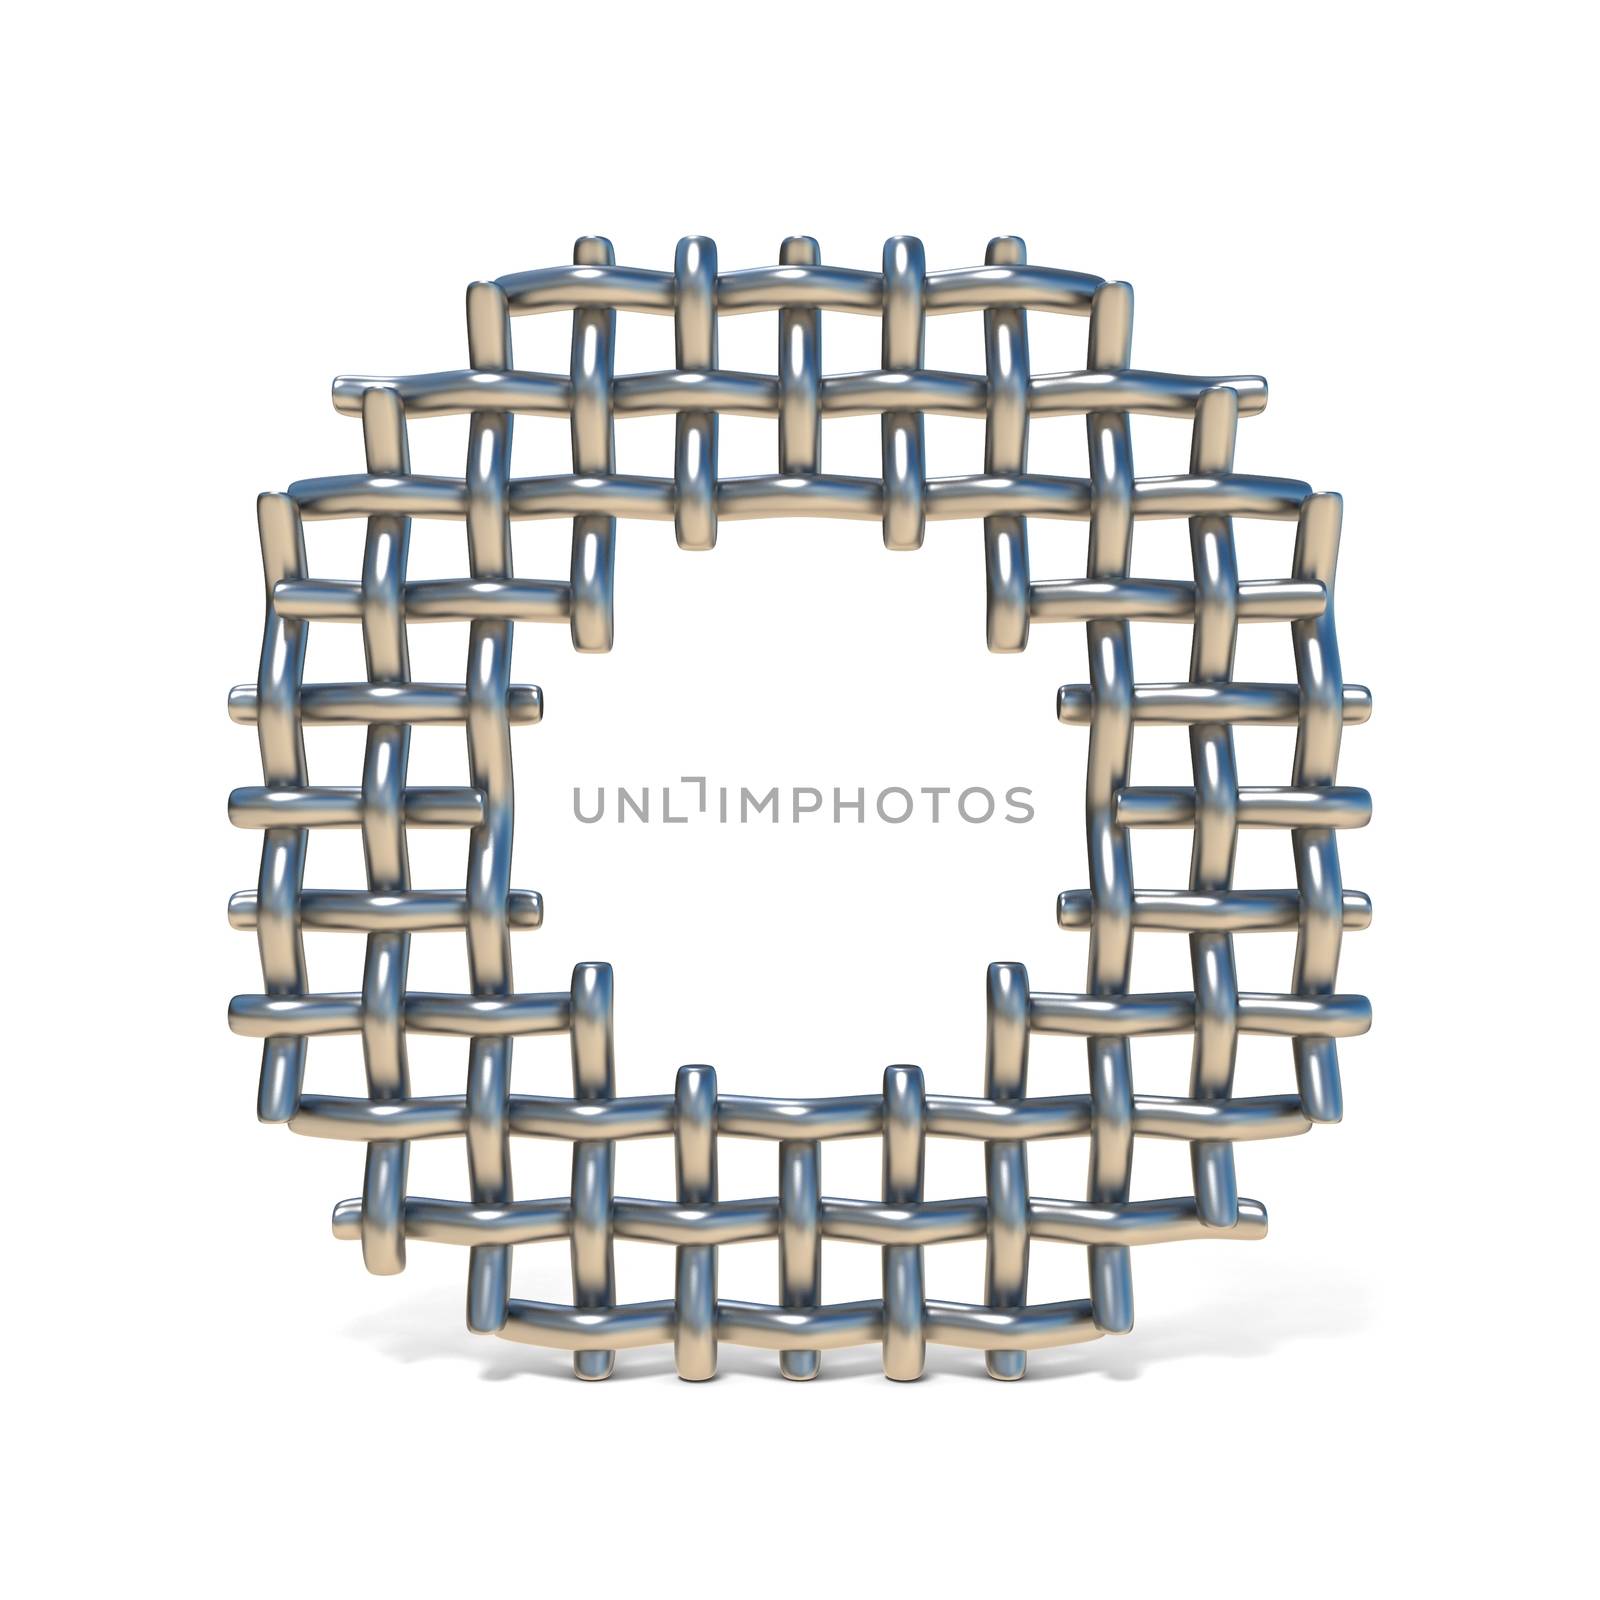 Metal wire mesh font LETTER O 3D render illustration isolated on white background